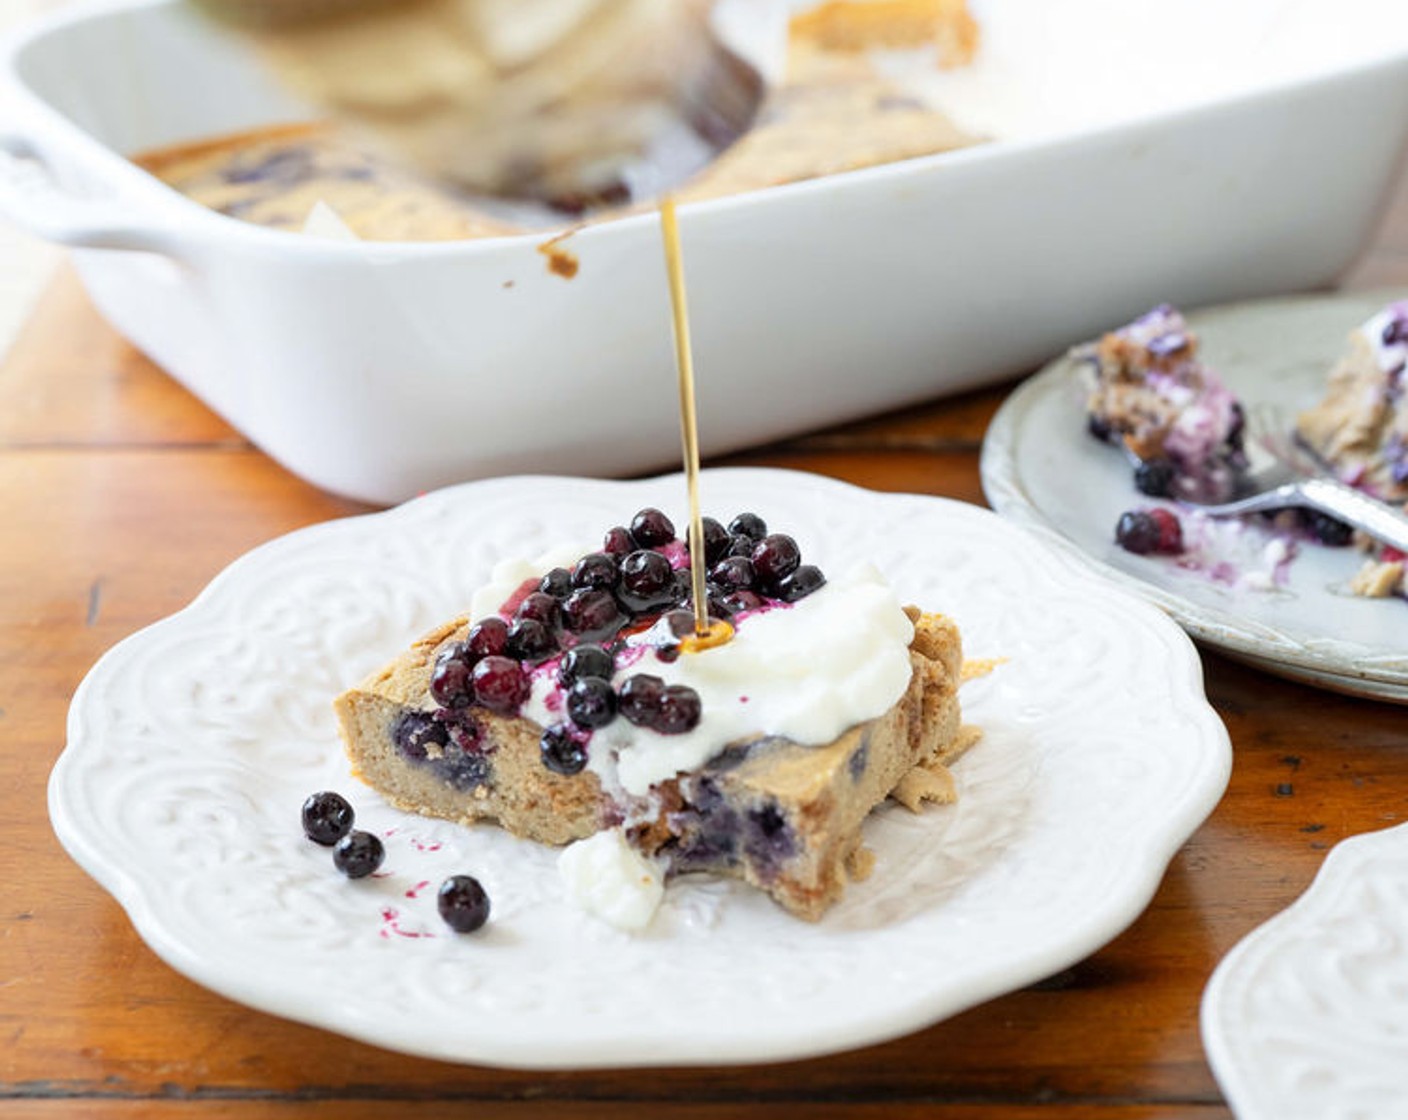 Baked Pancakes with Almond Butter and Berries